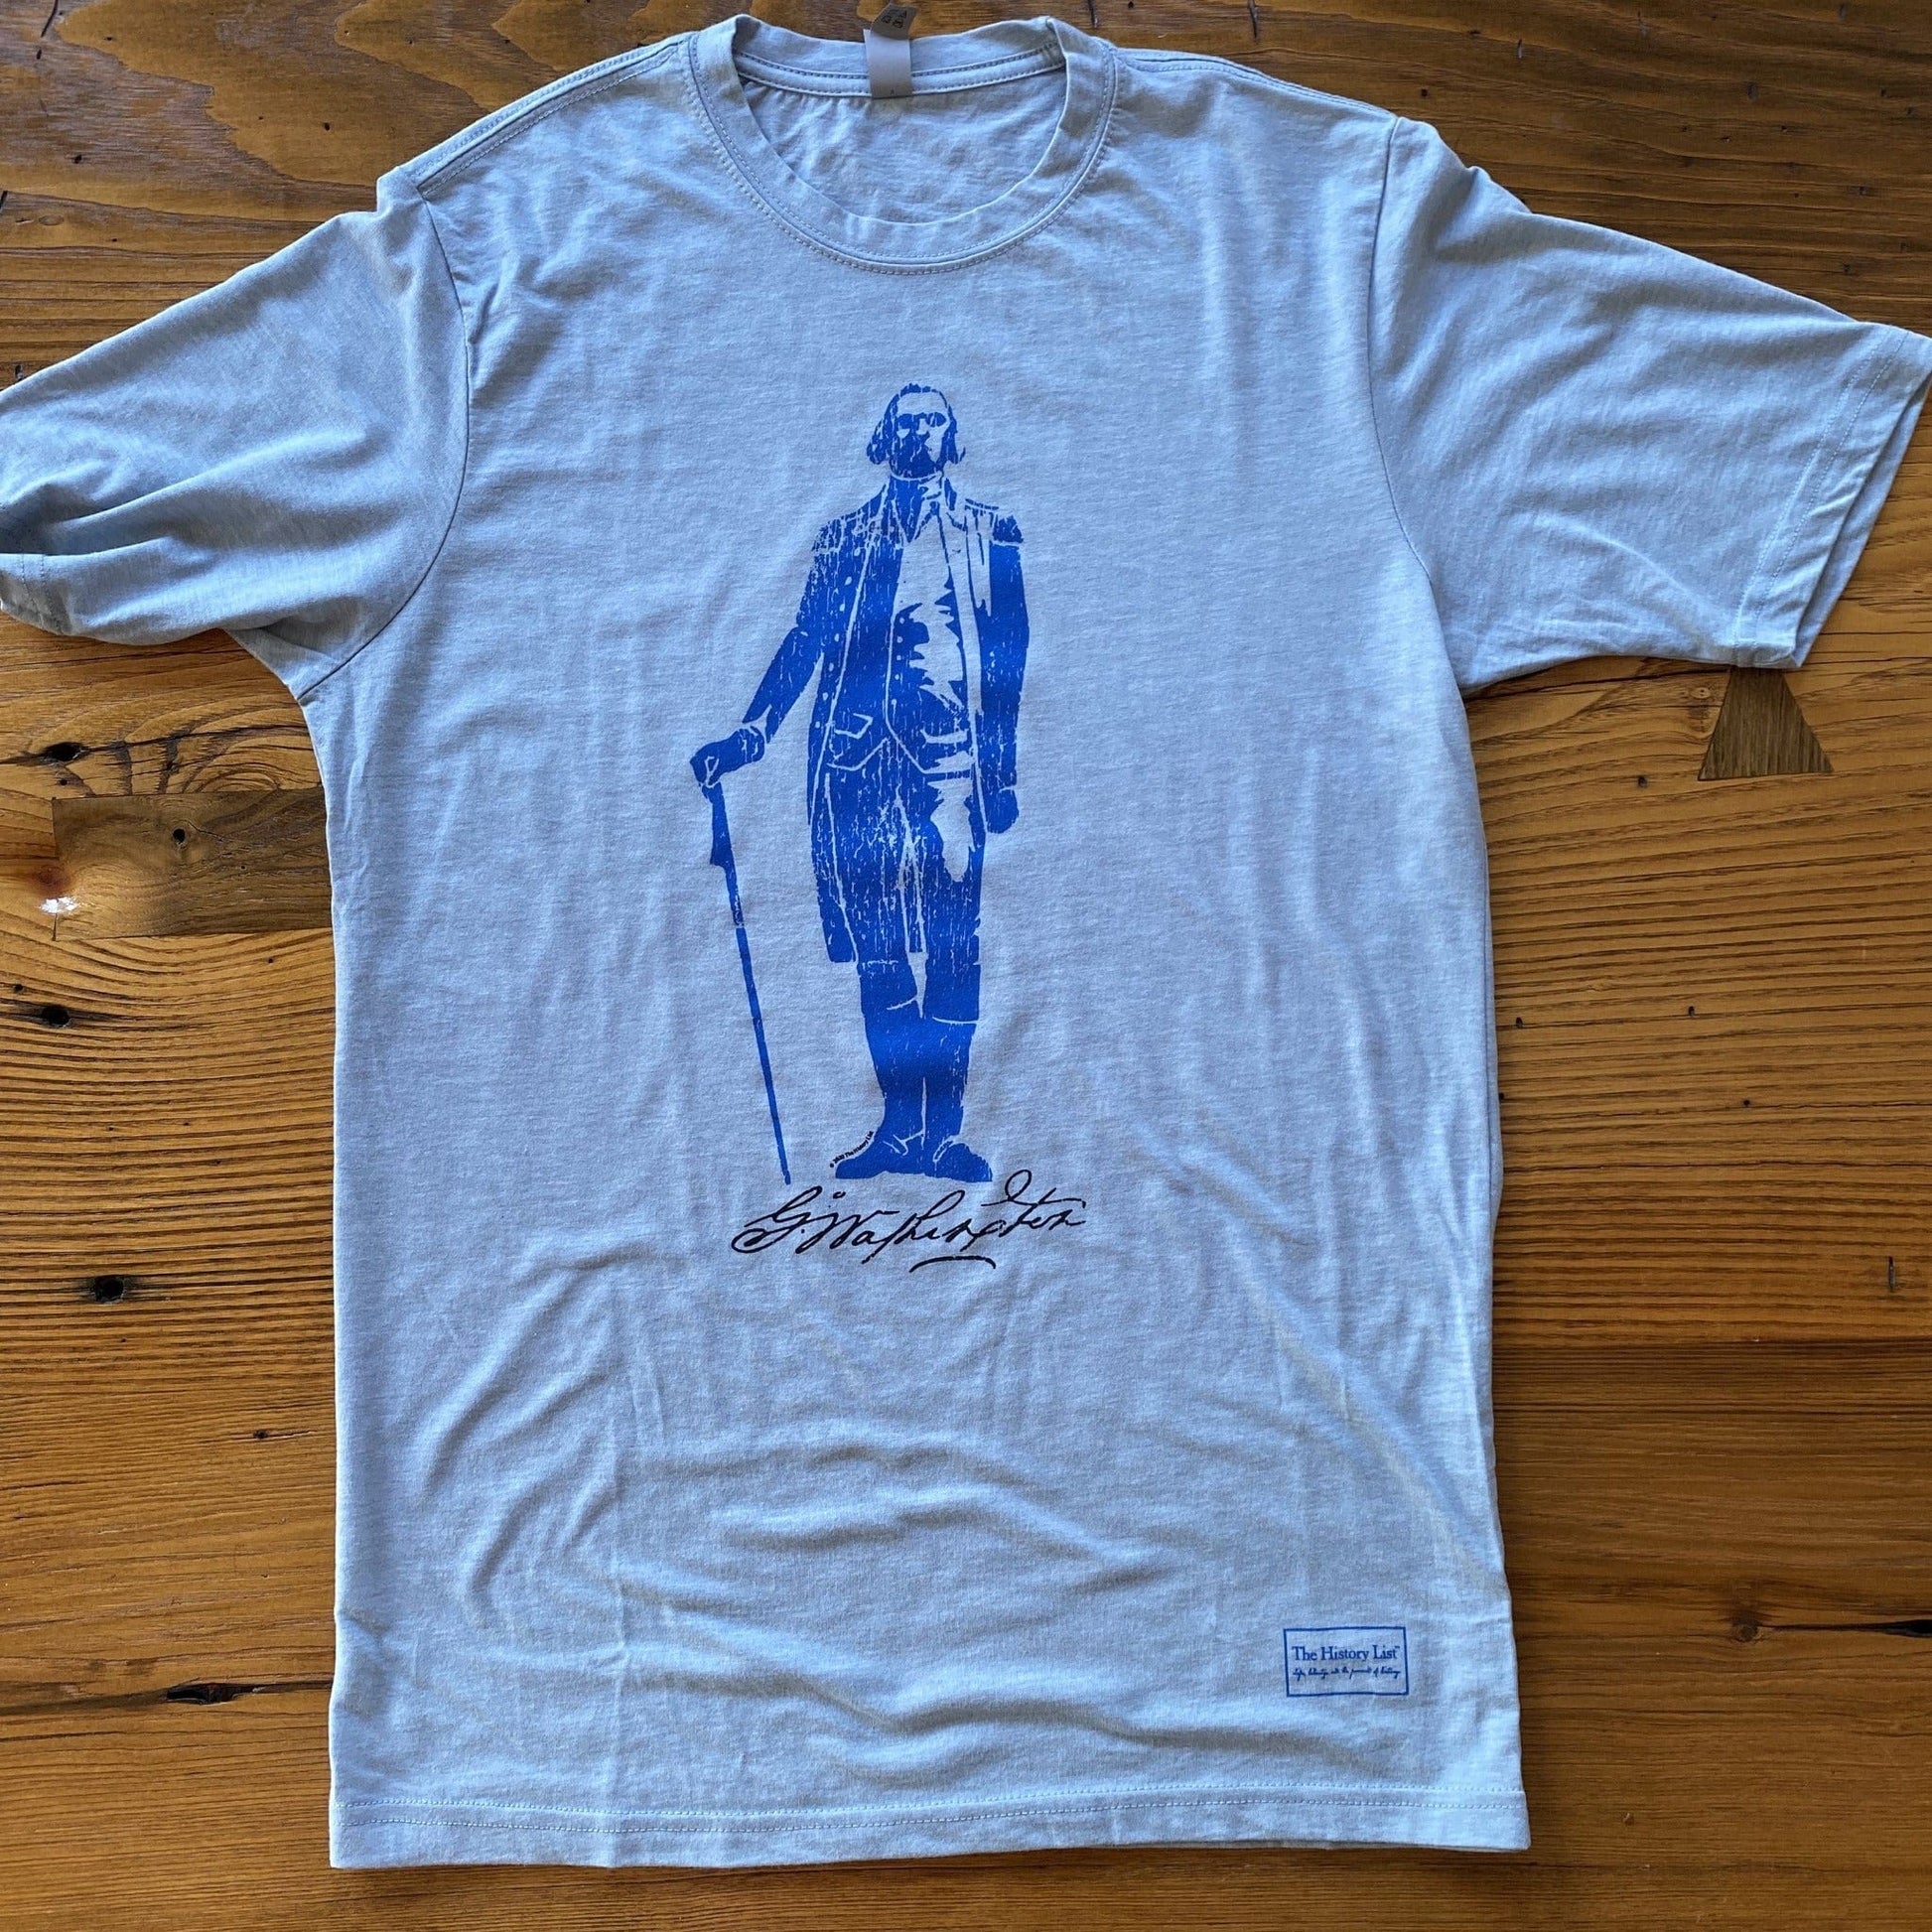 George Washington "Signature Series" Shirt from the history list store